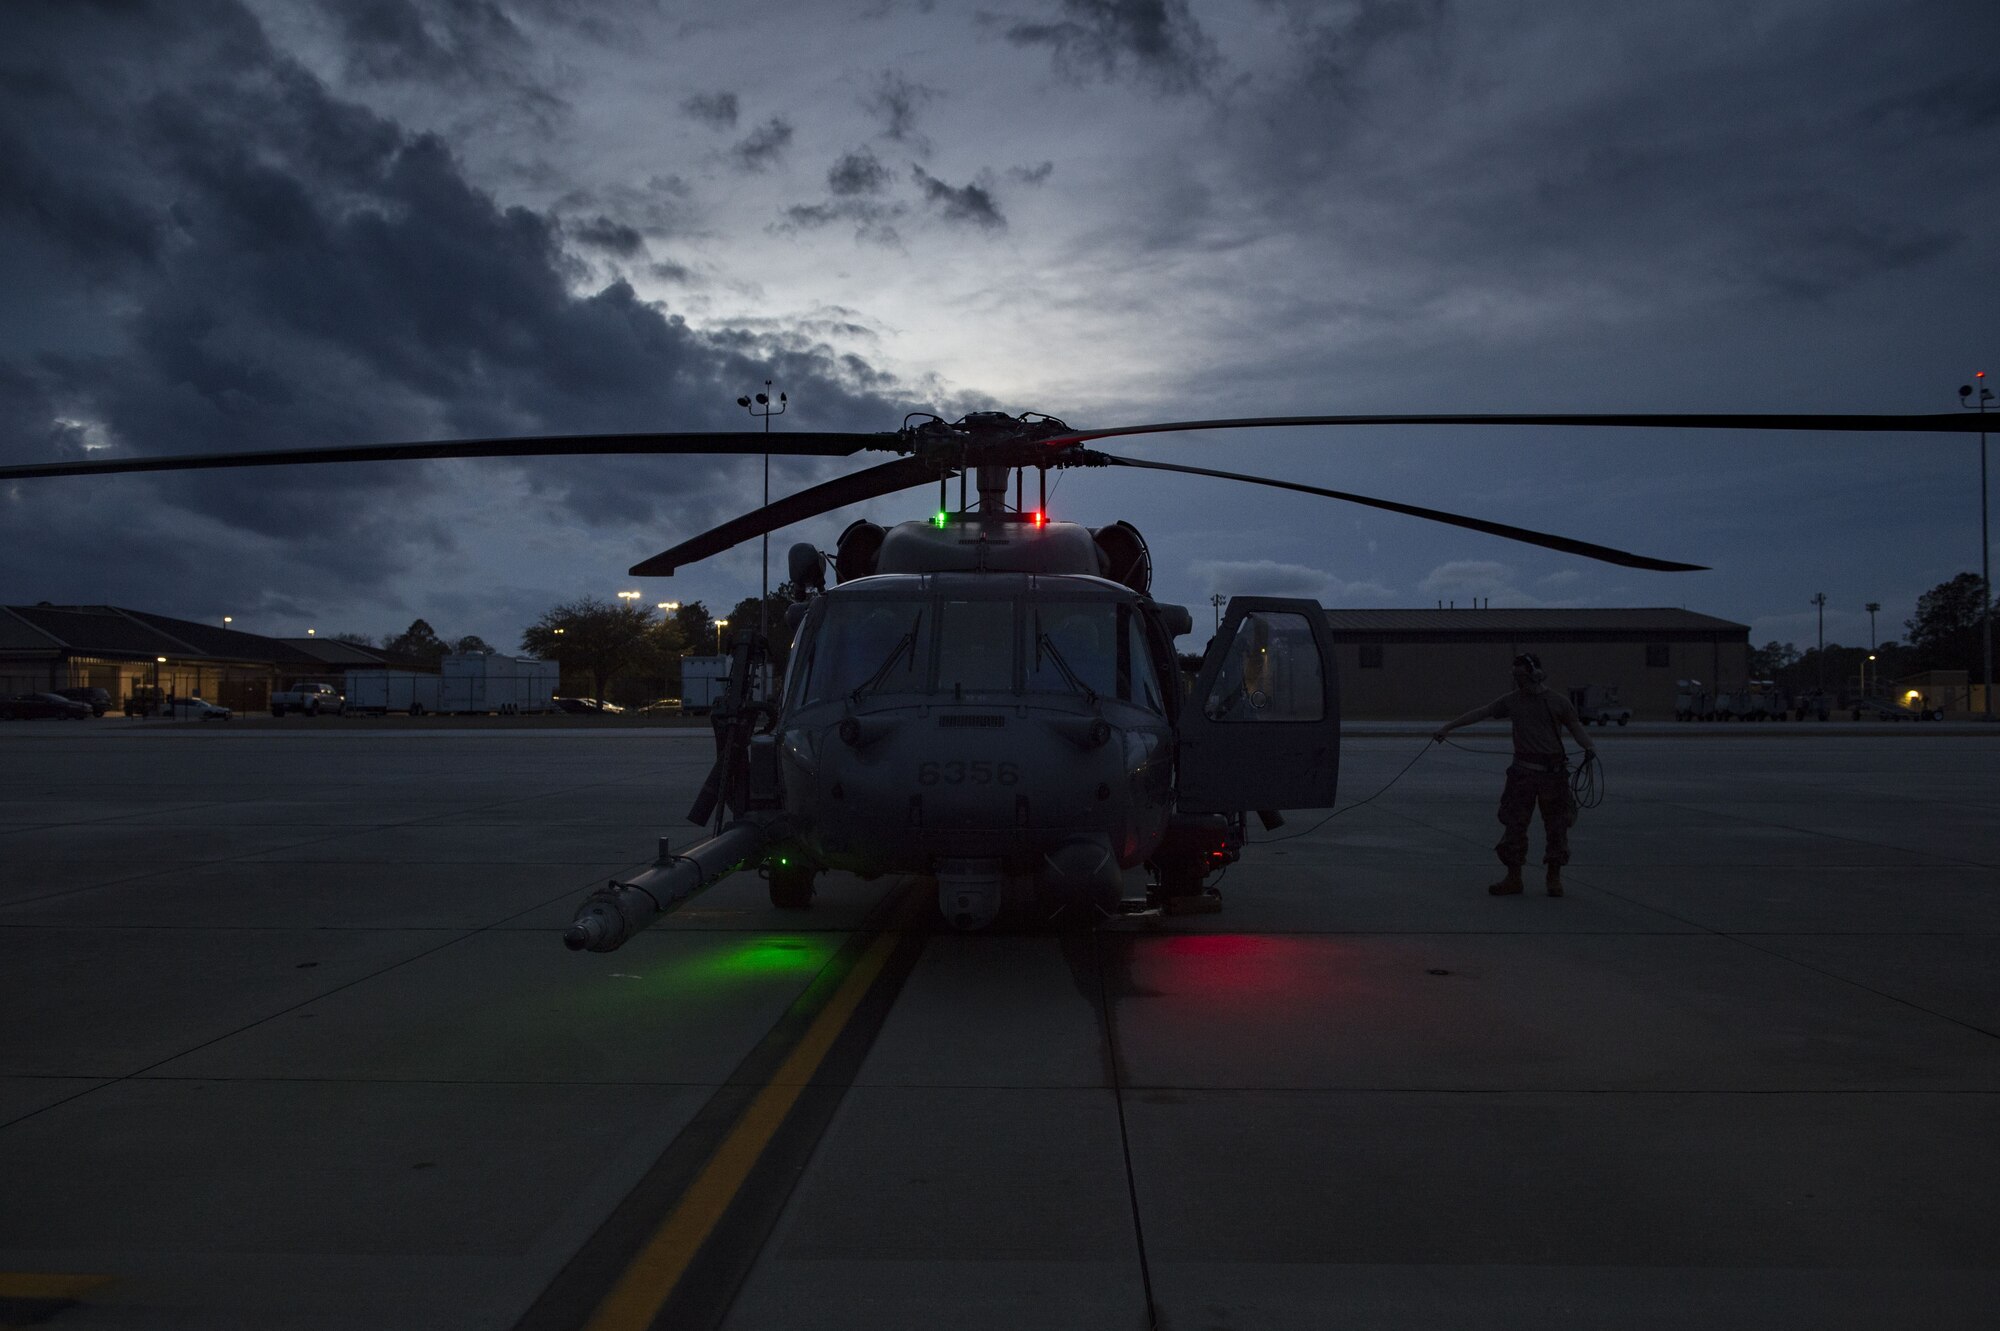 Airmen perform maintenance checks on an HH-60G Pave Hawk, Jan. 22, 2018, at Moody Air Force Base, Ga. The 41st RQS is responsible for maintaining combat-ready personnel for recovery missions. To achieve this, members of the squadron constantly train on day and nighttime operations to maintain proficiency. (U.S. Air Force photo by Senior Airman Janiqua P. Robinson)